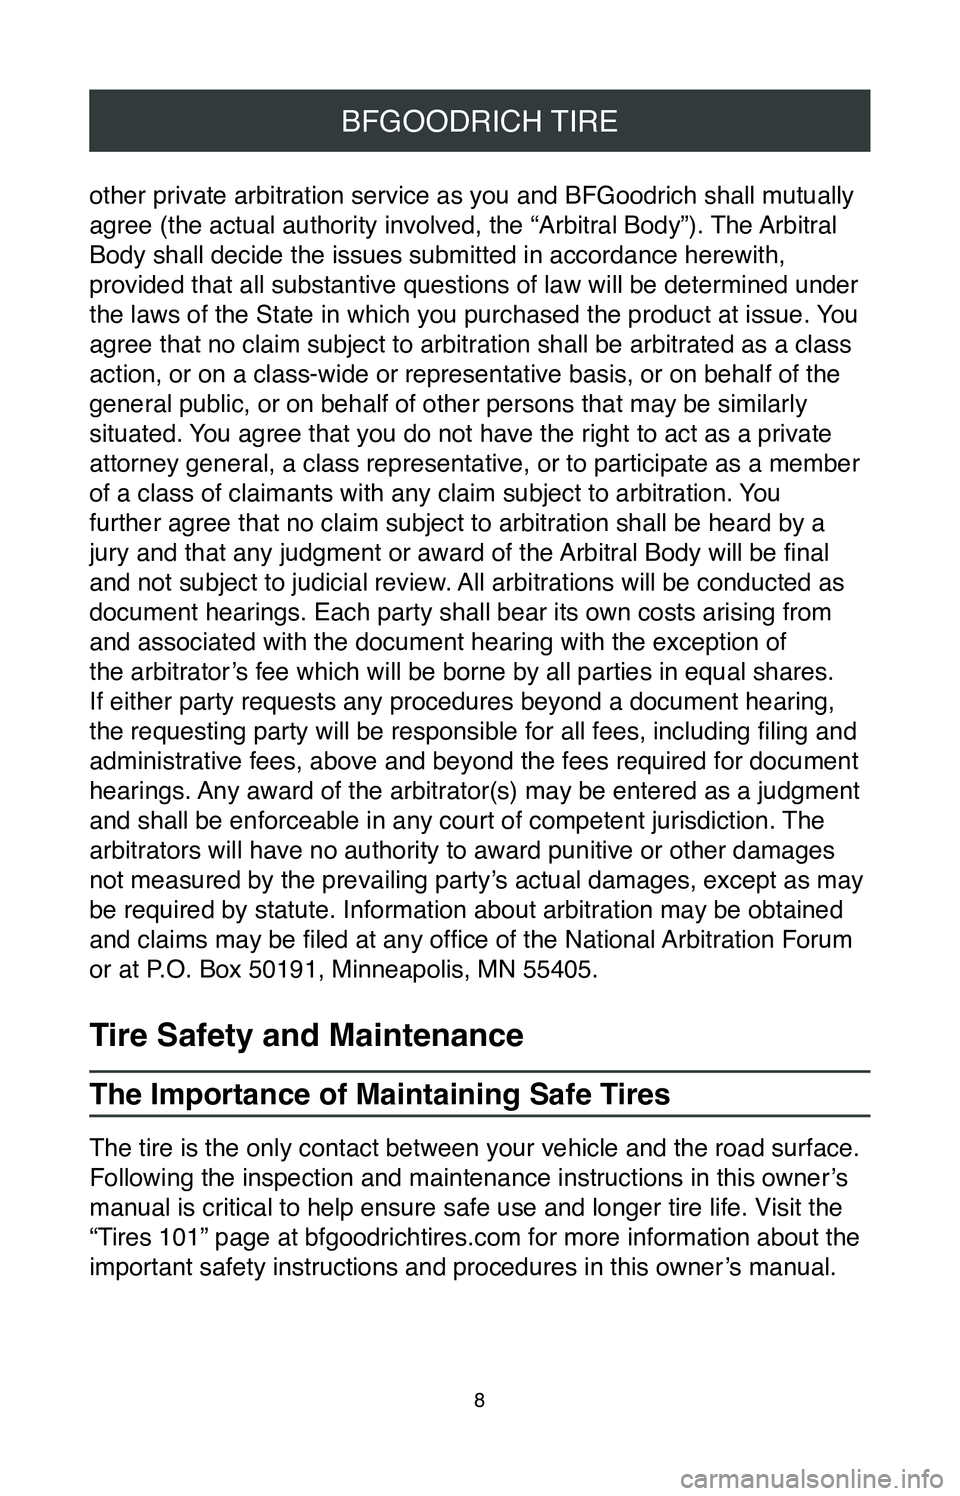 TOYOTA YARIS 2020  Warranties & Maintenance Guides (in English) 8
BFGOODRICH TIRE
other private arbitration service as you and BFGoodrich shall mutually 
agree (the actual authority involved, the “Arbitral Body”). The Arbitral 
Body shall decide the issues sub